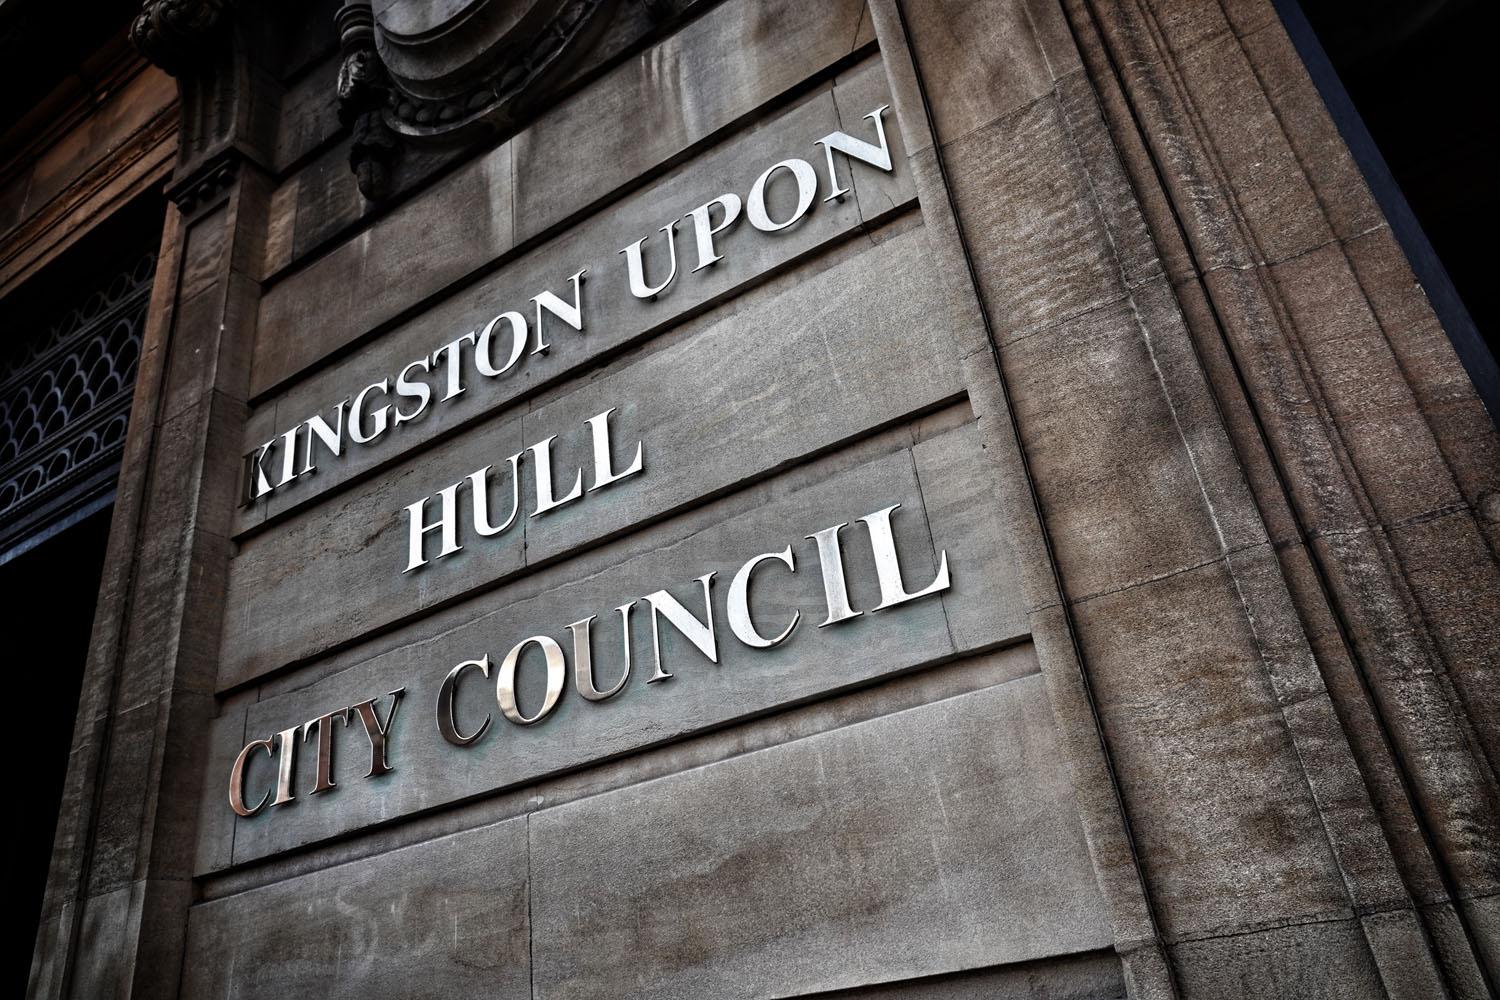 Hull city council guildhall sign